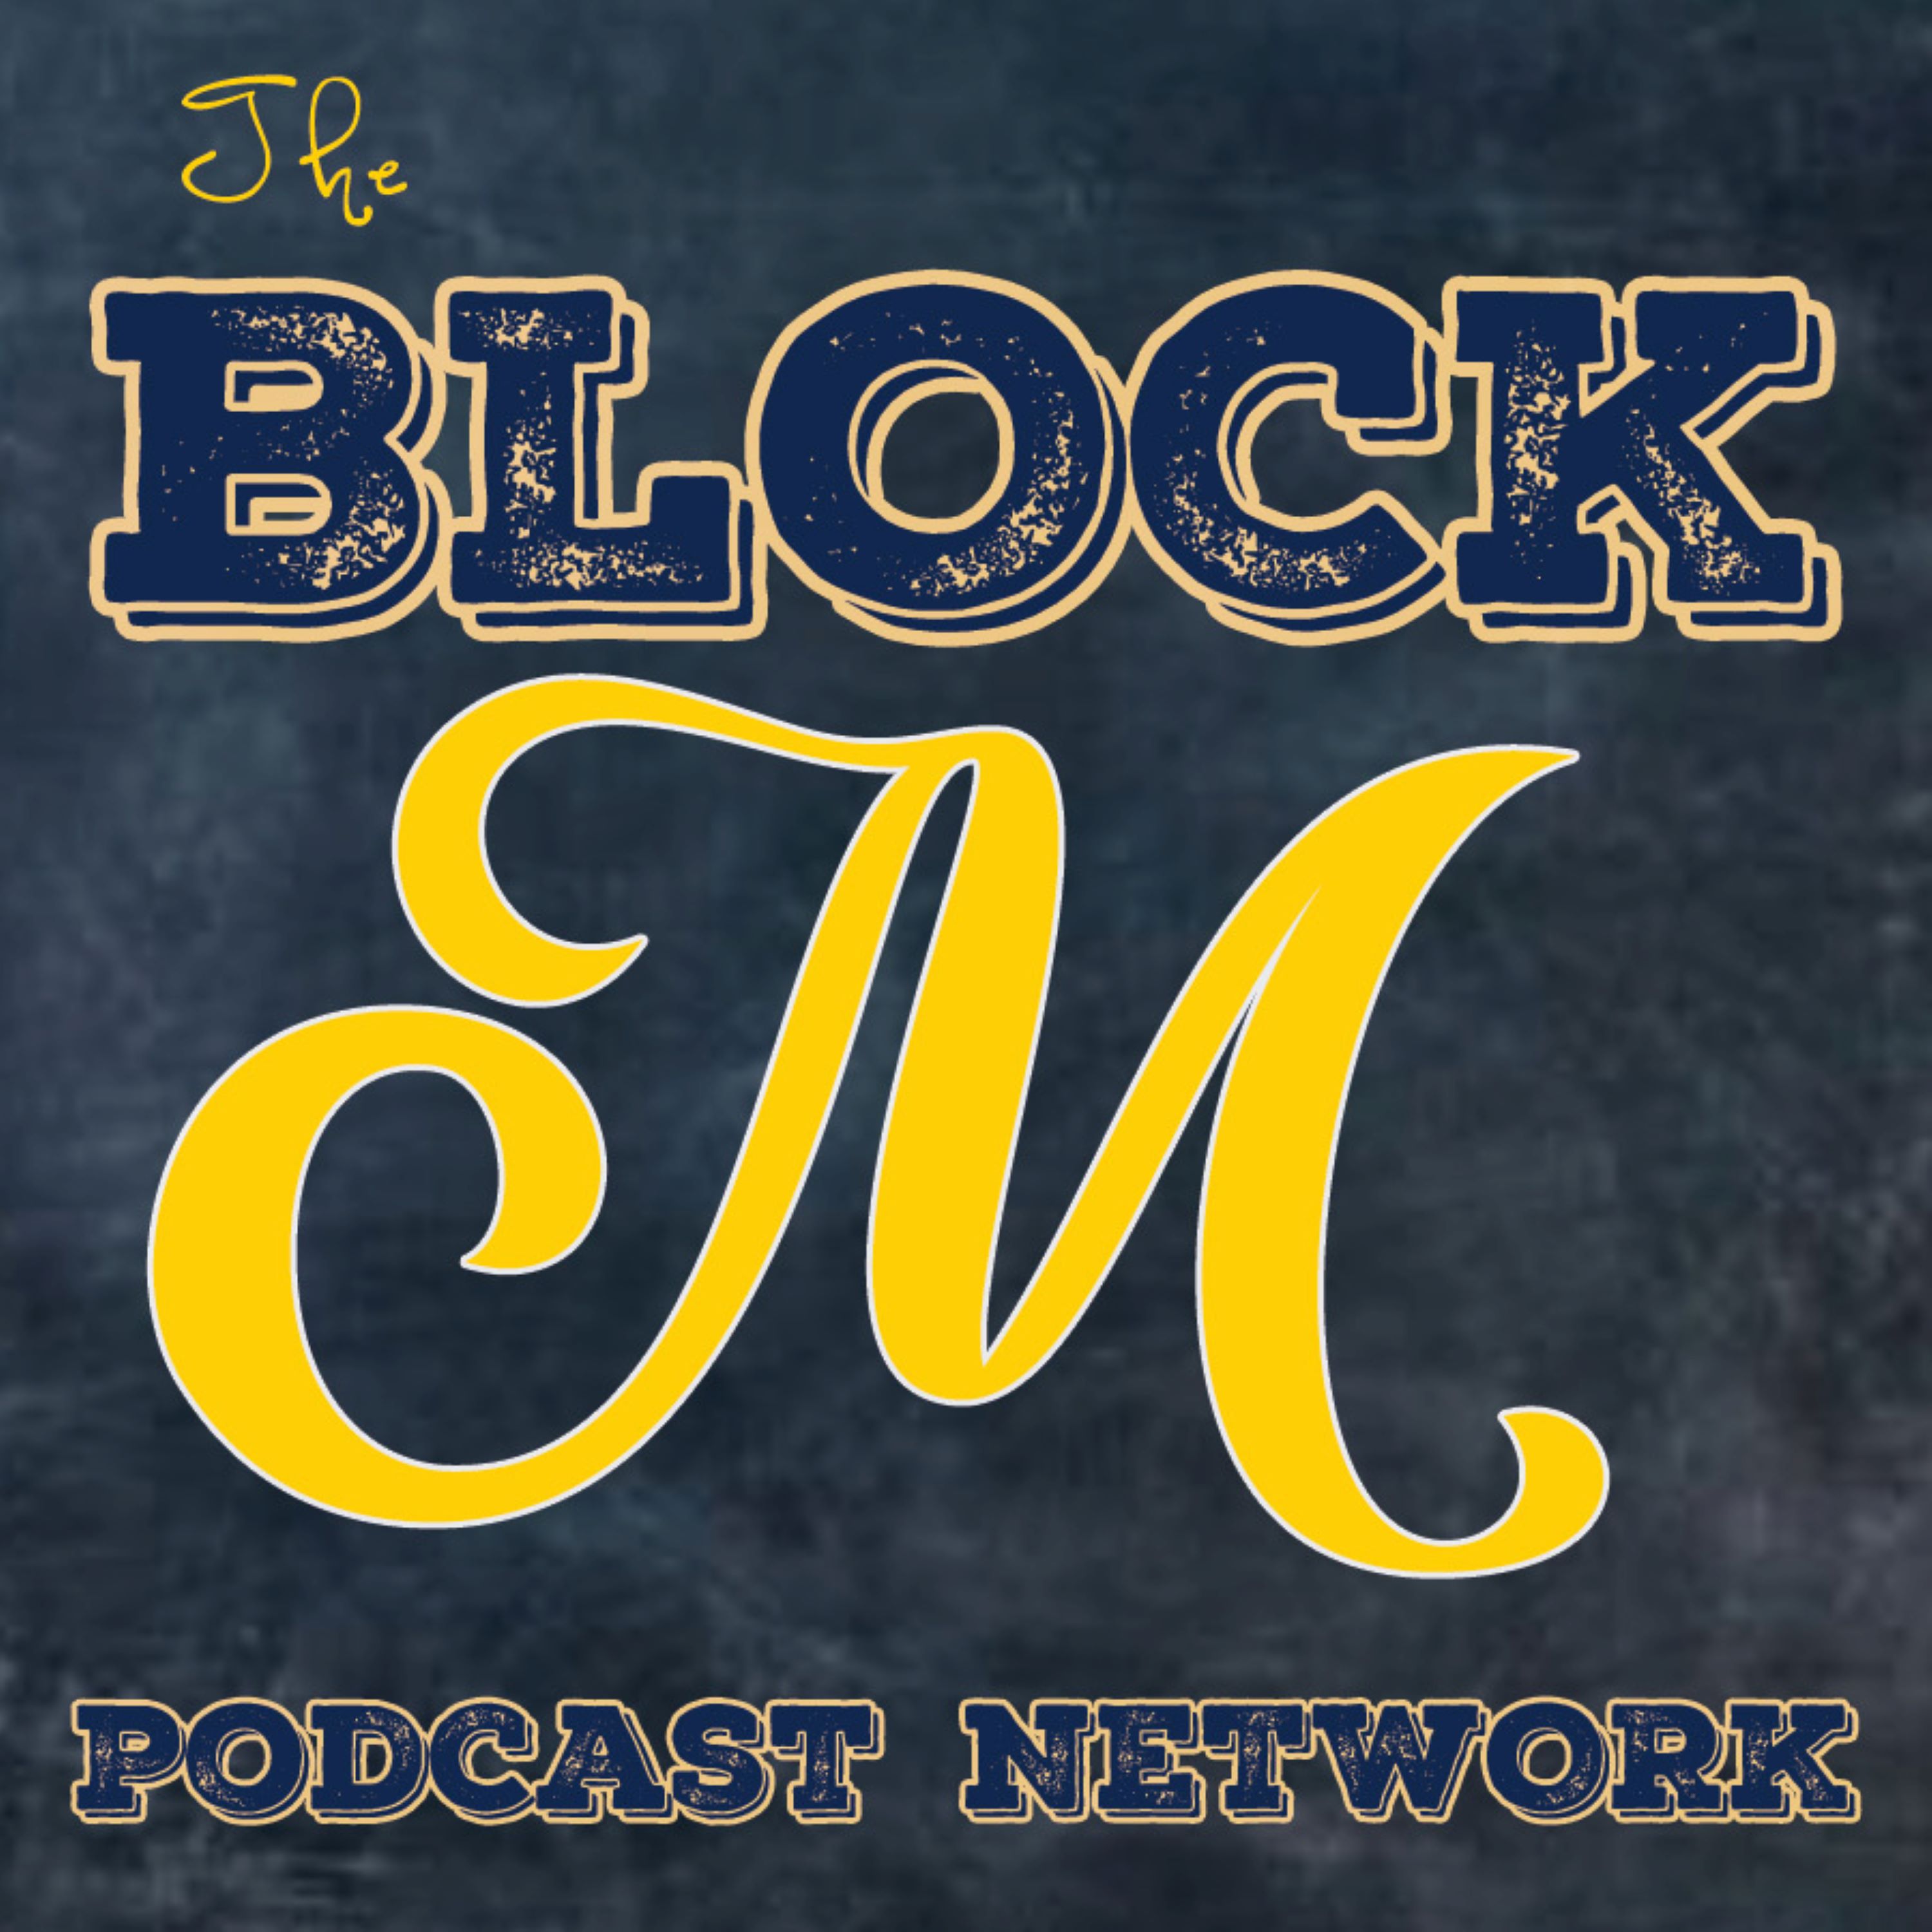 Michigan Football Podcast: Out of the Blue - Maize n Brew